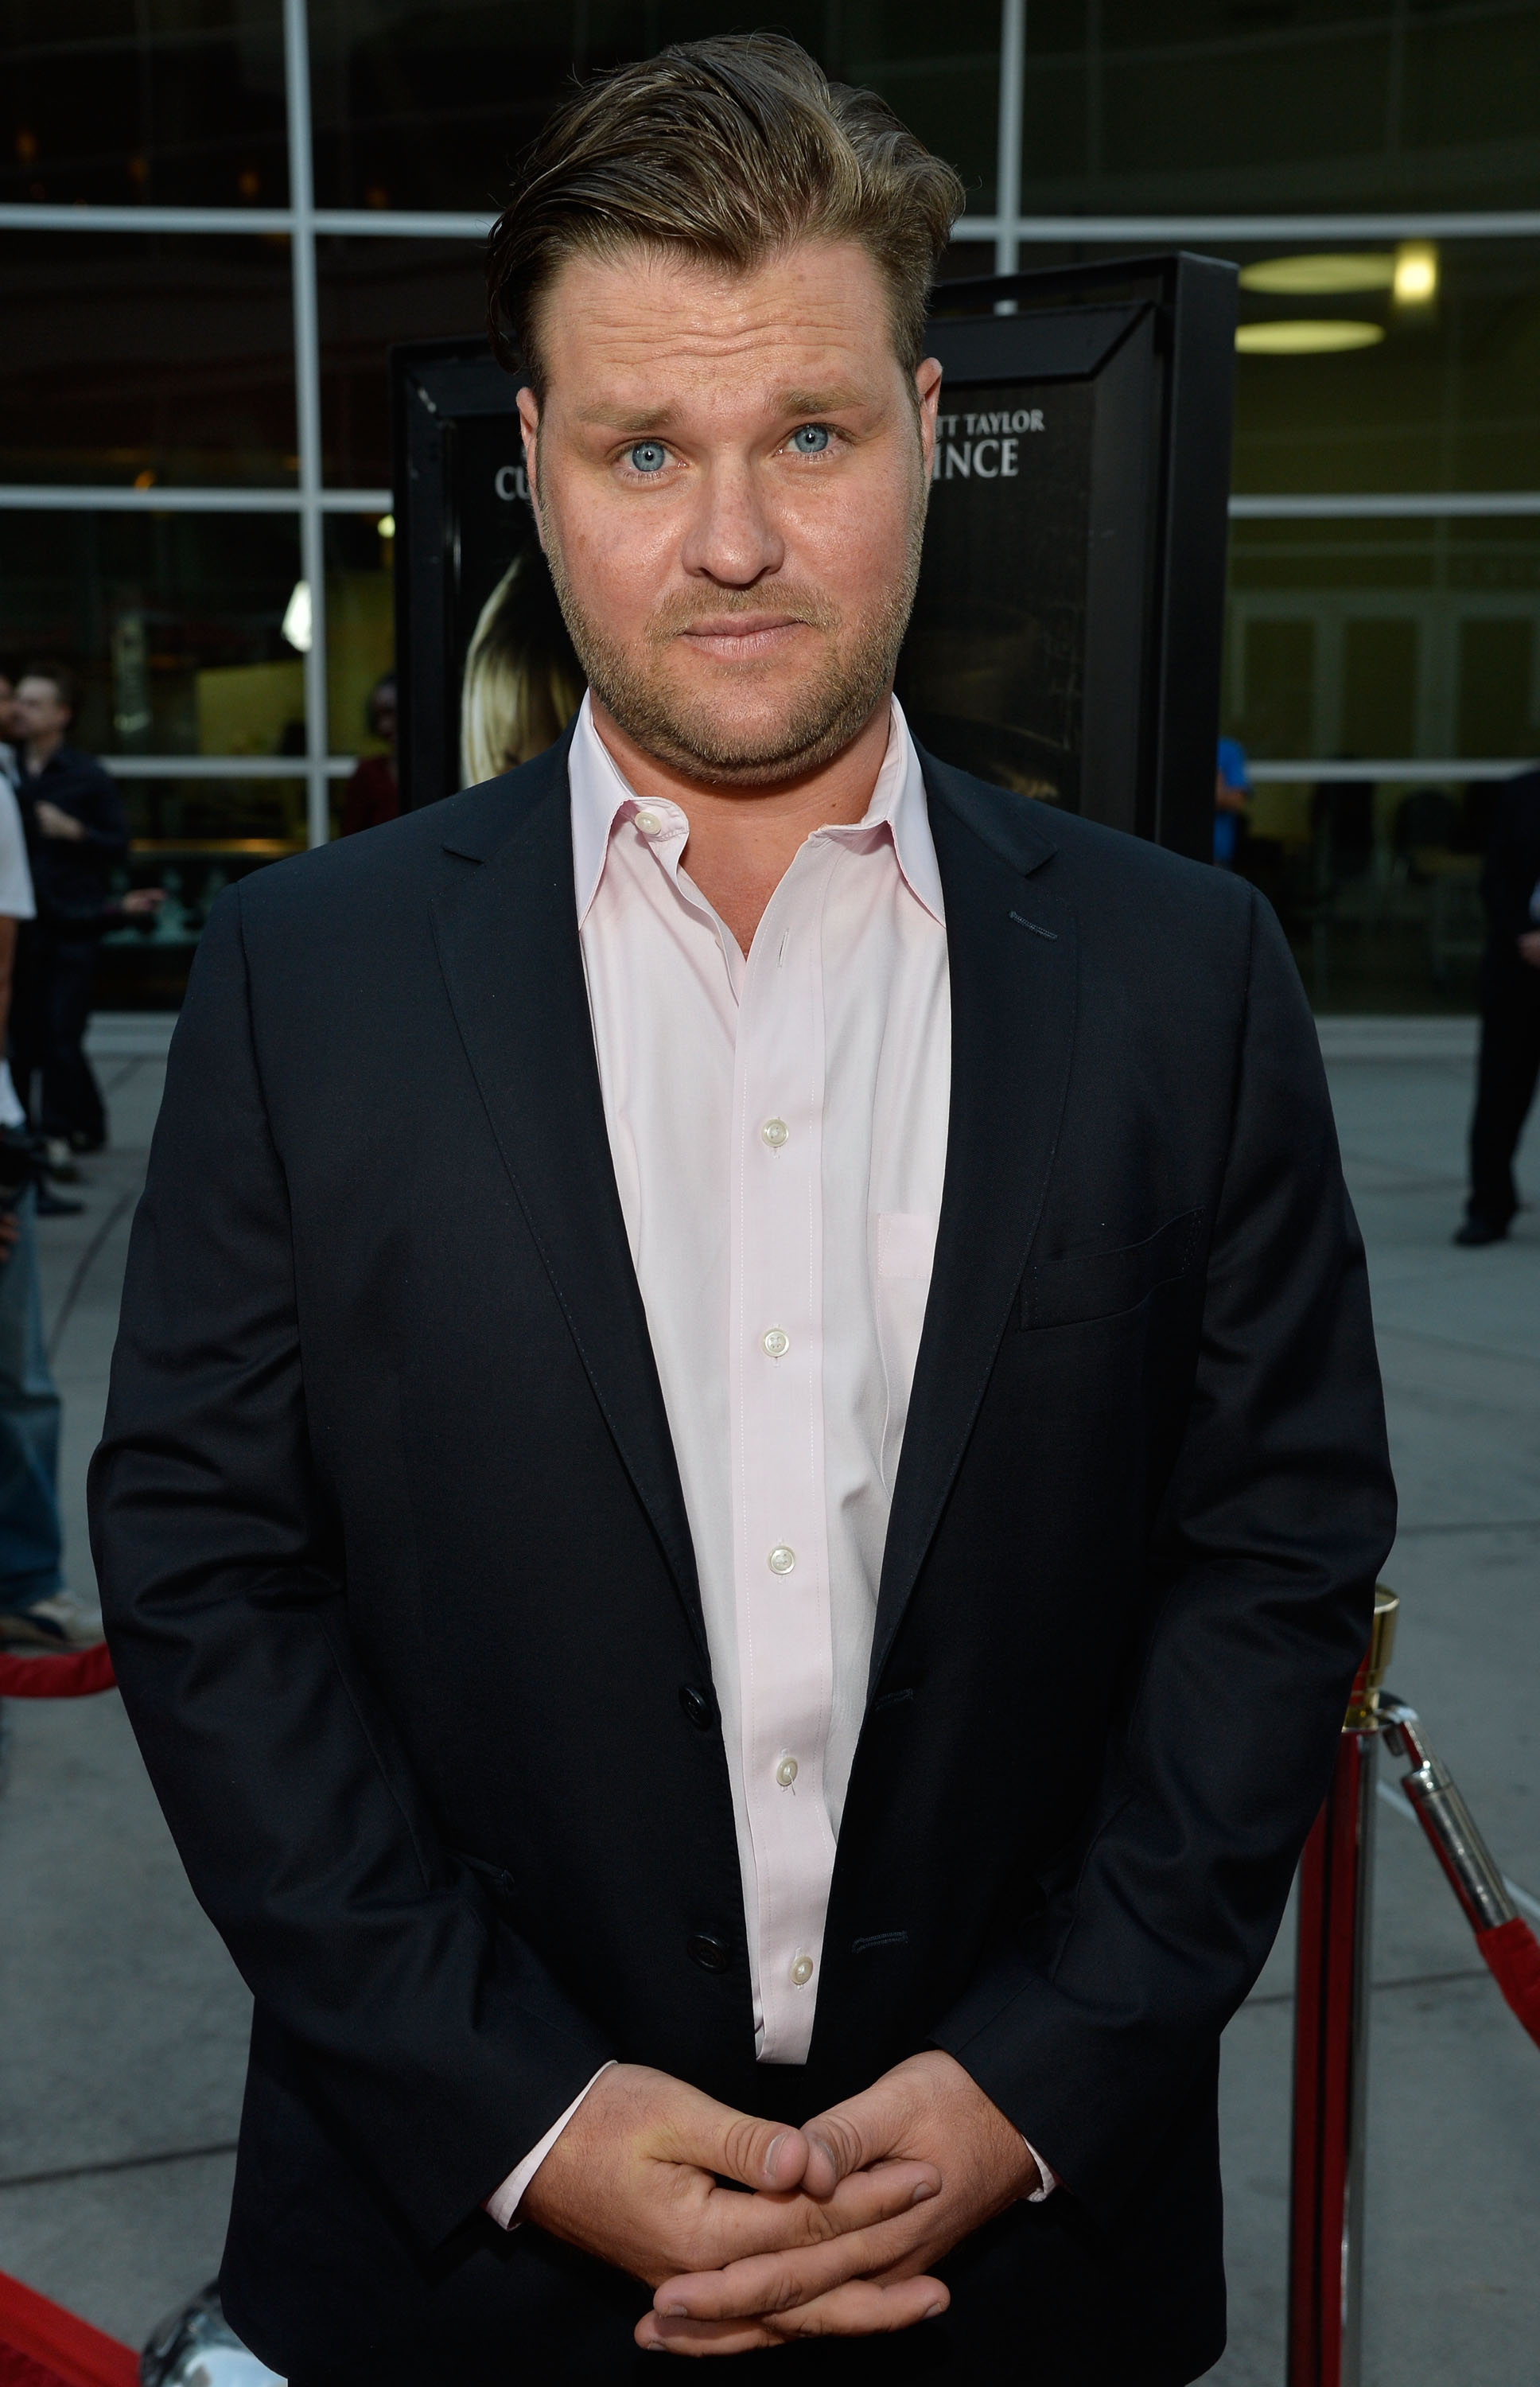 Zachery Ty Bryan on August 14, 2013 in Hollywood, California. | Source: Getty Images